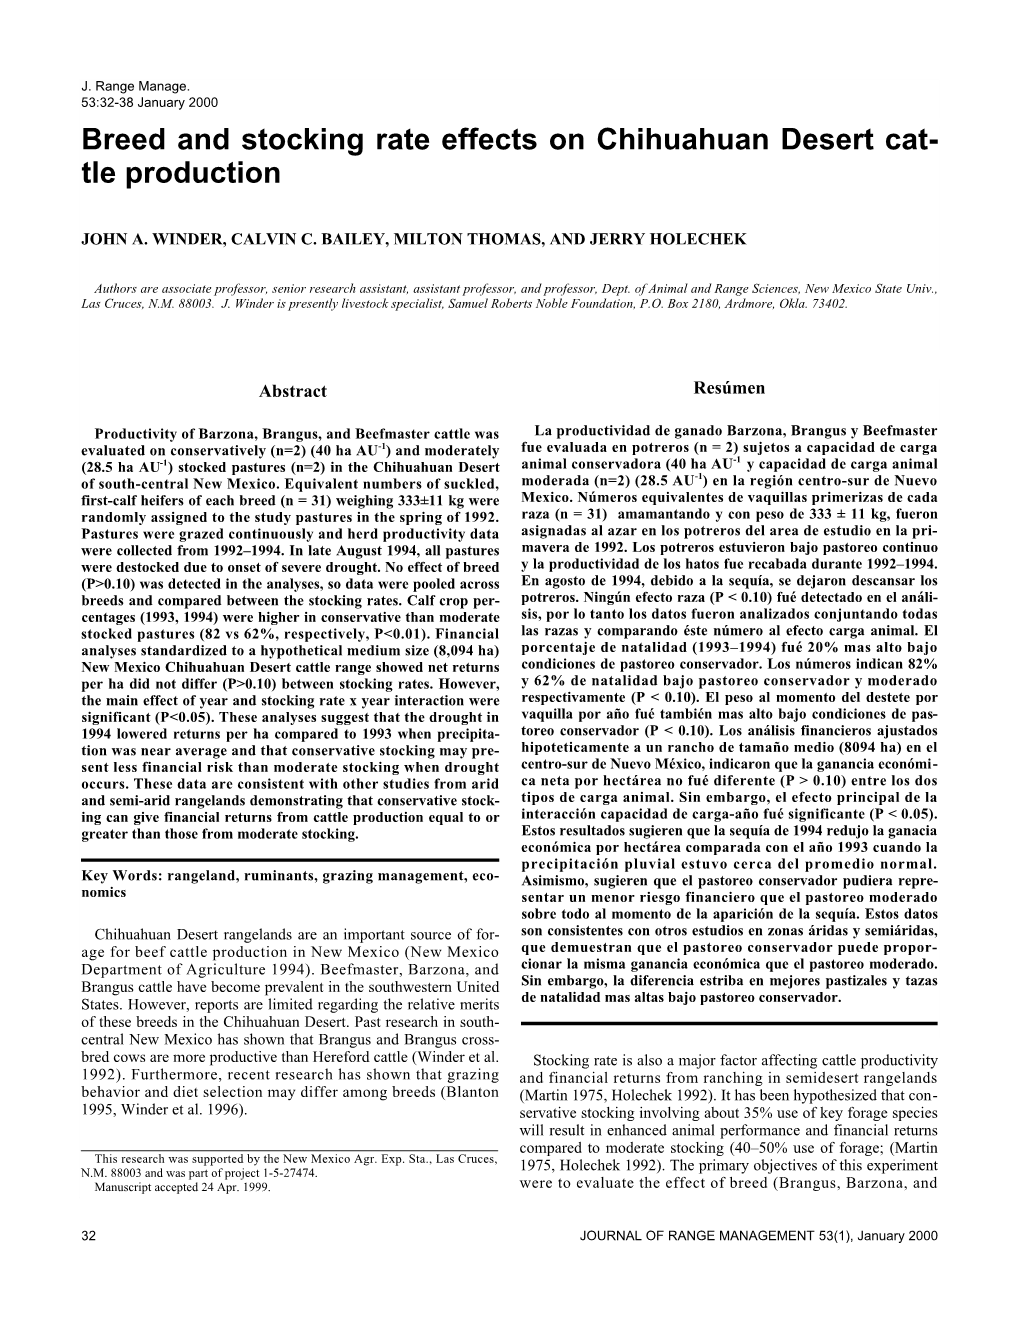 Breed and Stocking Rate Effects on Chihuahuan Desert Cat- Tle Production